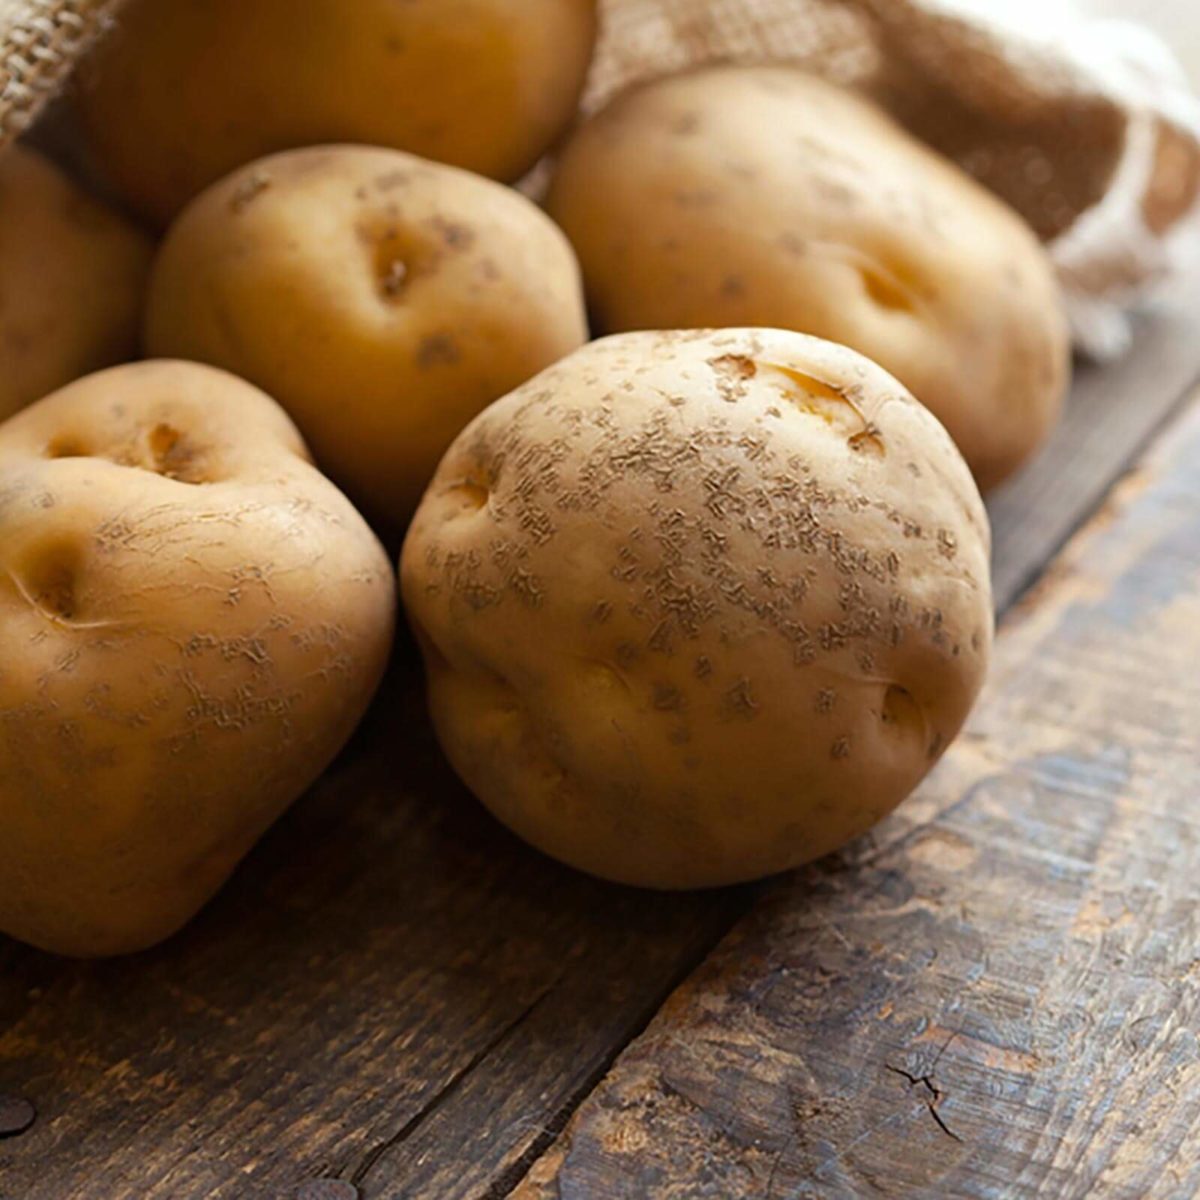 Can You Eat Raw Potatoes? Here's What a Dietitian Says